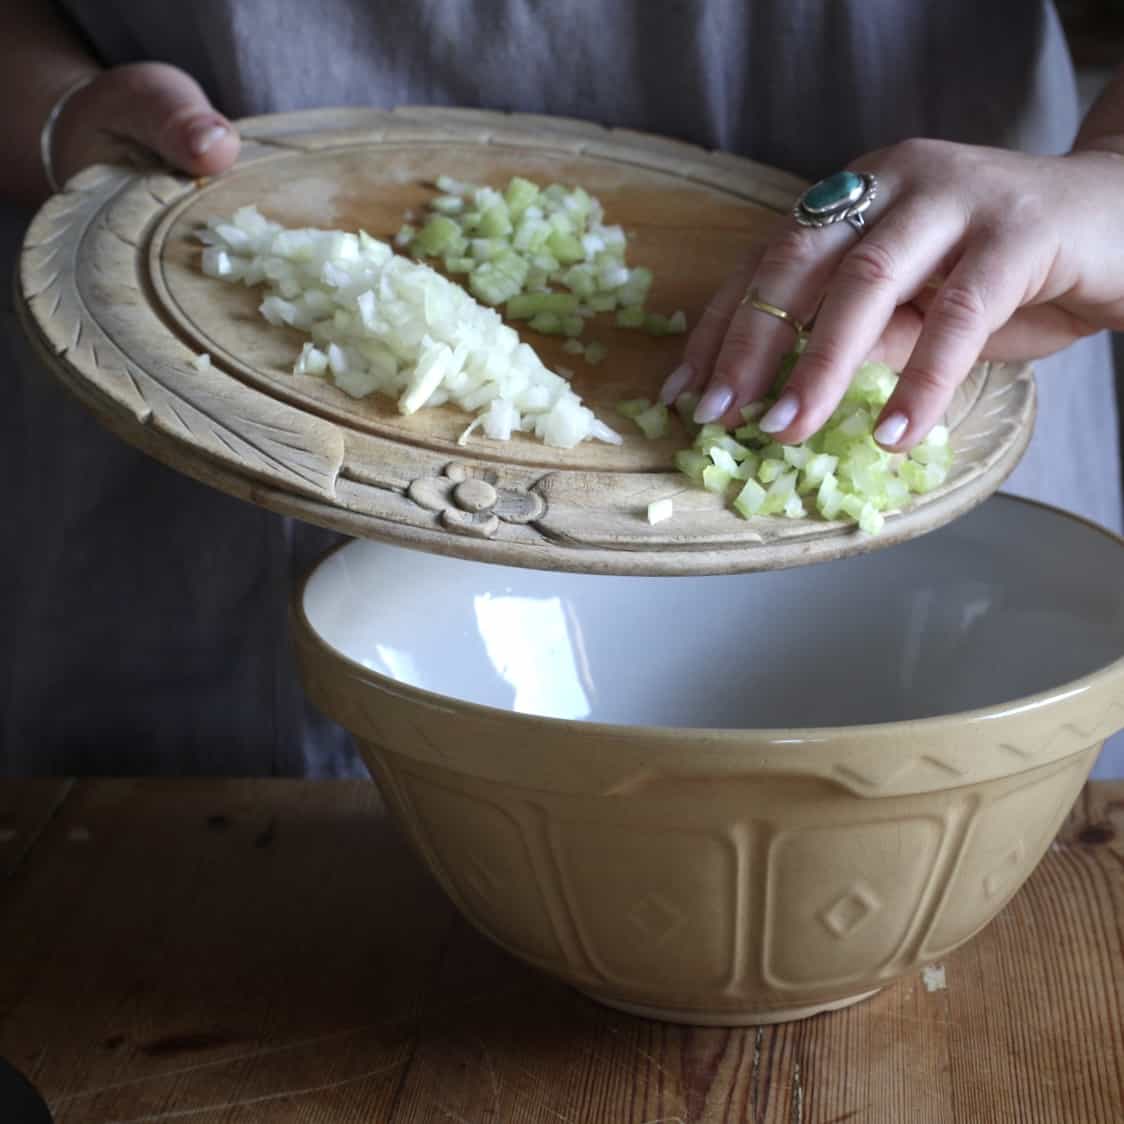 Woman sliding chopped veggies from a wooden board into a large mixing bowl